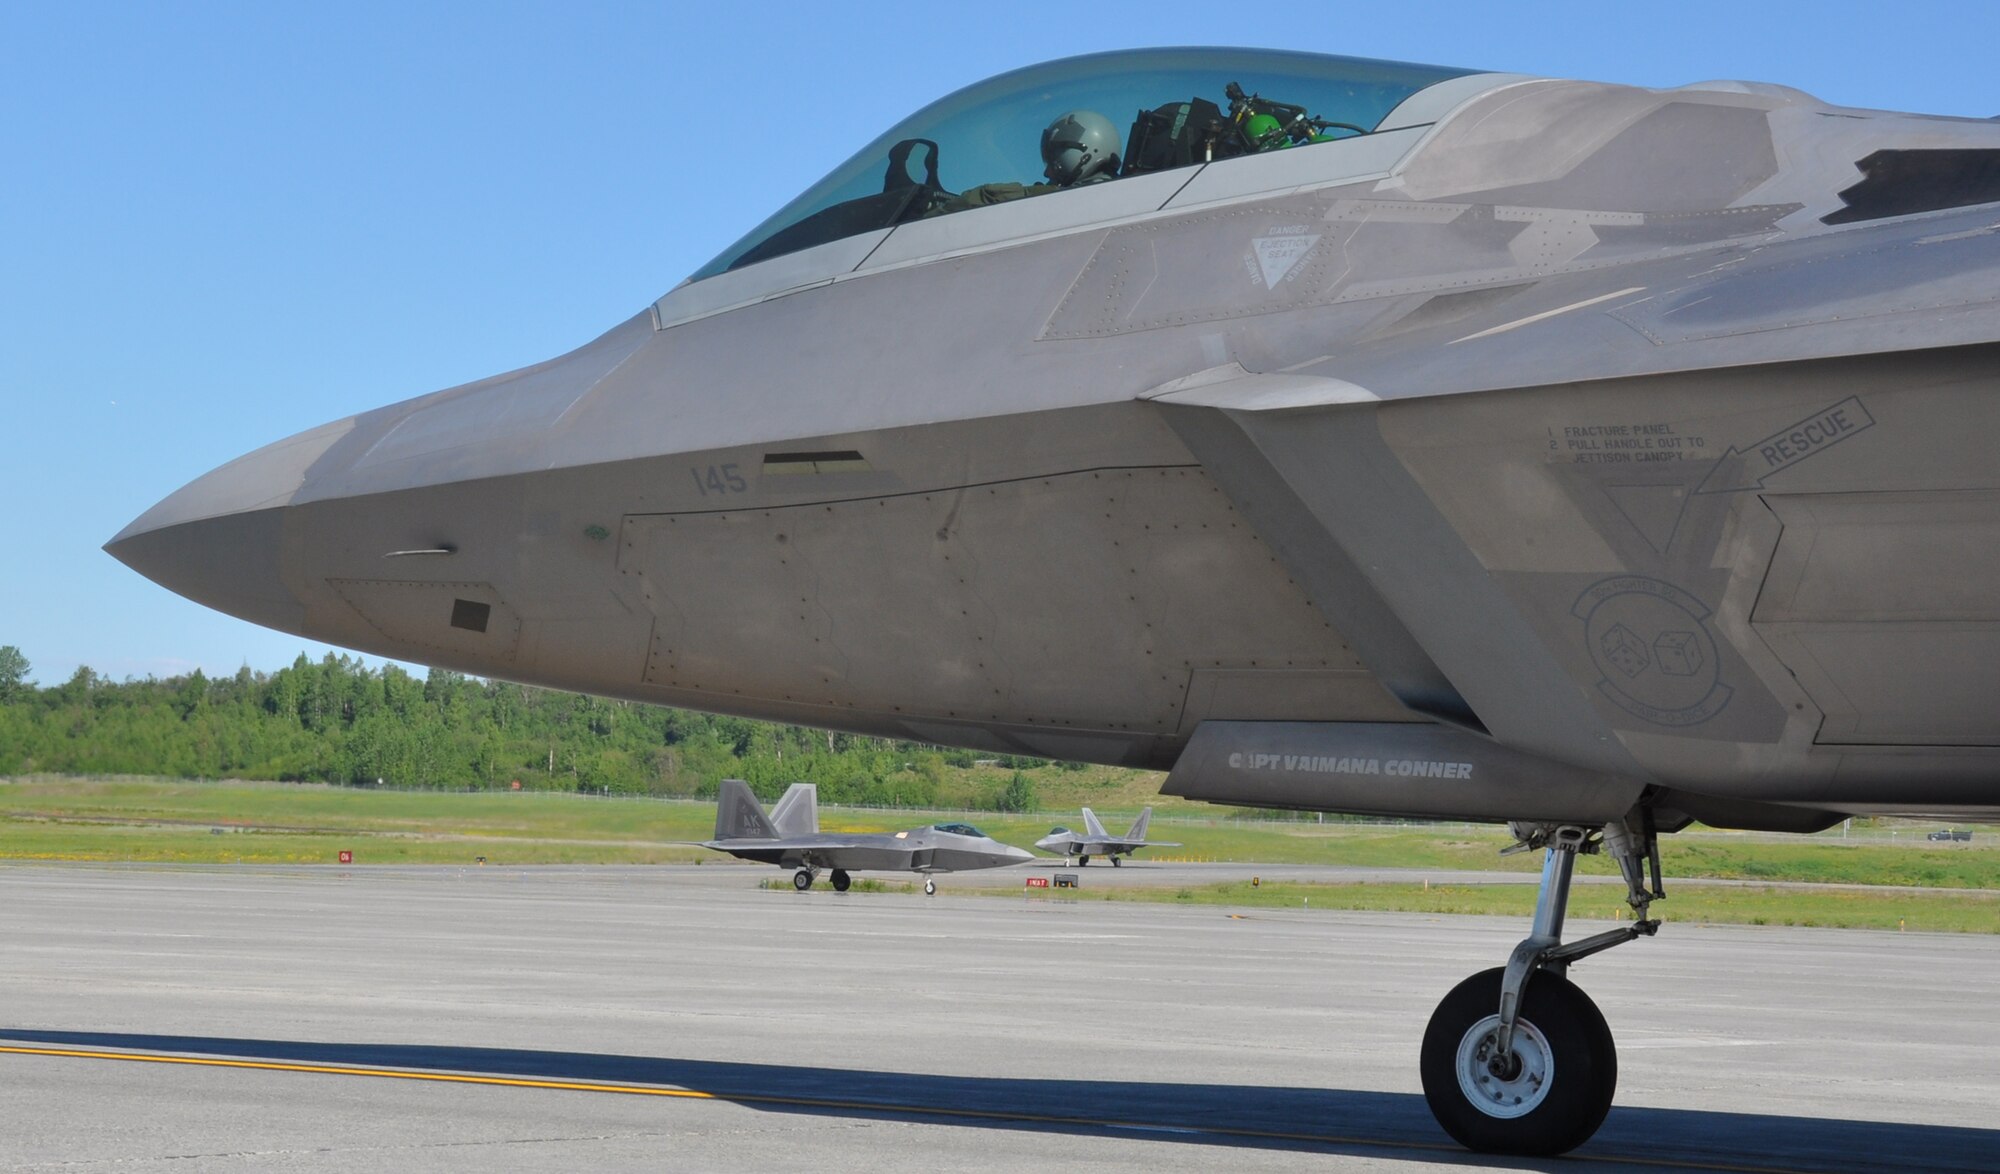 F-22’s assigned to the 3rd Wing taxi into the hot pits after flying a sortie here June 12.  F-22 pilots from the 90th, 525th and 302nd Fighter Squadrons flew over 90 sorties June 11-12 to test the maintenance and flying capability of Alaska’s Raptors. (U.S. Air Force/Capt. Ashley Conner) 

